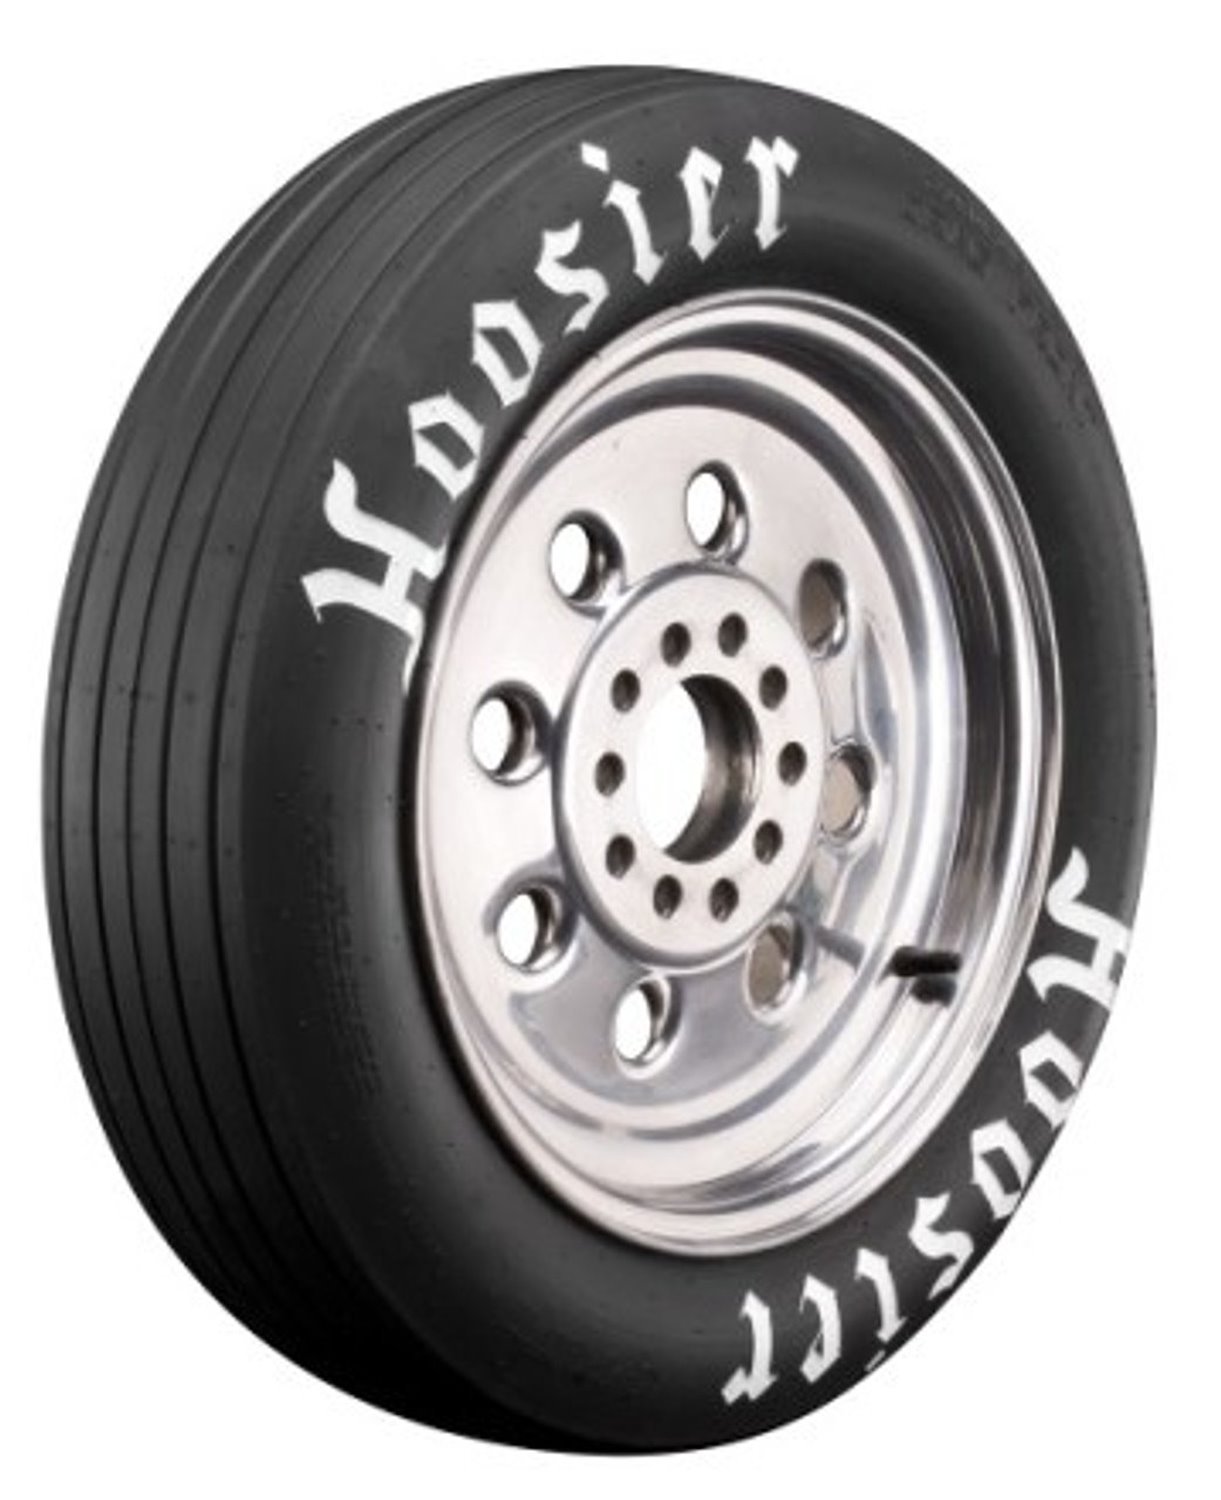 18105 Front Drag Racing Tire 26 x 4.5-15